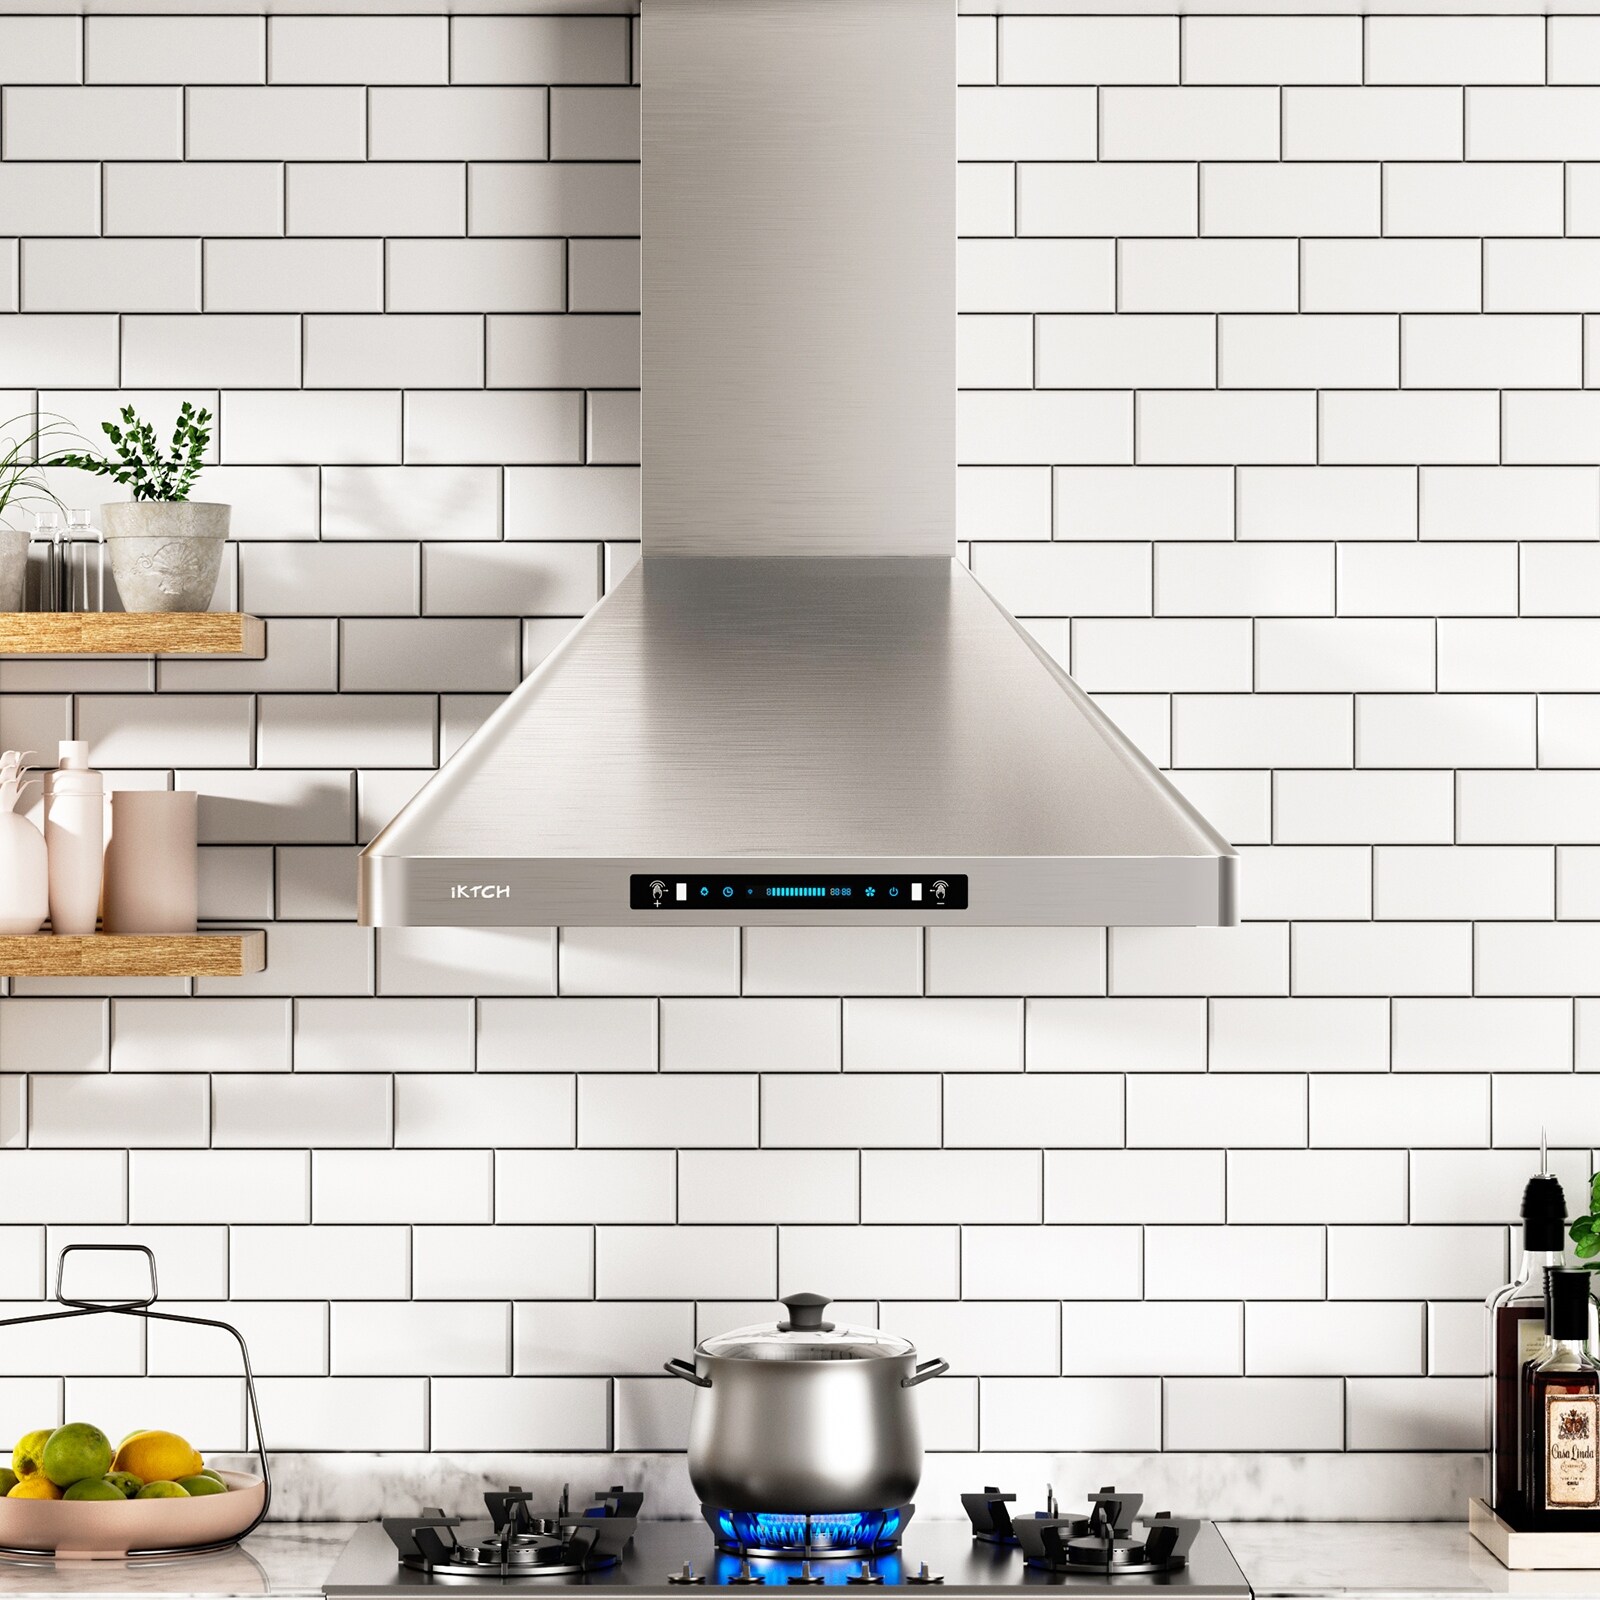 https://ak1.ostkcdn.com/images/products/is/images/direct/0fb9dbd020b79b0b0a2bab2158dca9fb303dc798/IKTCH-30-inch-Vent-Wall-Mount-Range-Hood---Powerful-900-CFM-Stainless-Steel-Chimney-Vent-for-Clean-Air-and-Modern-Style.jpg